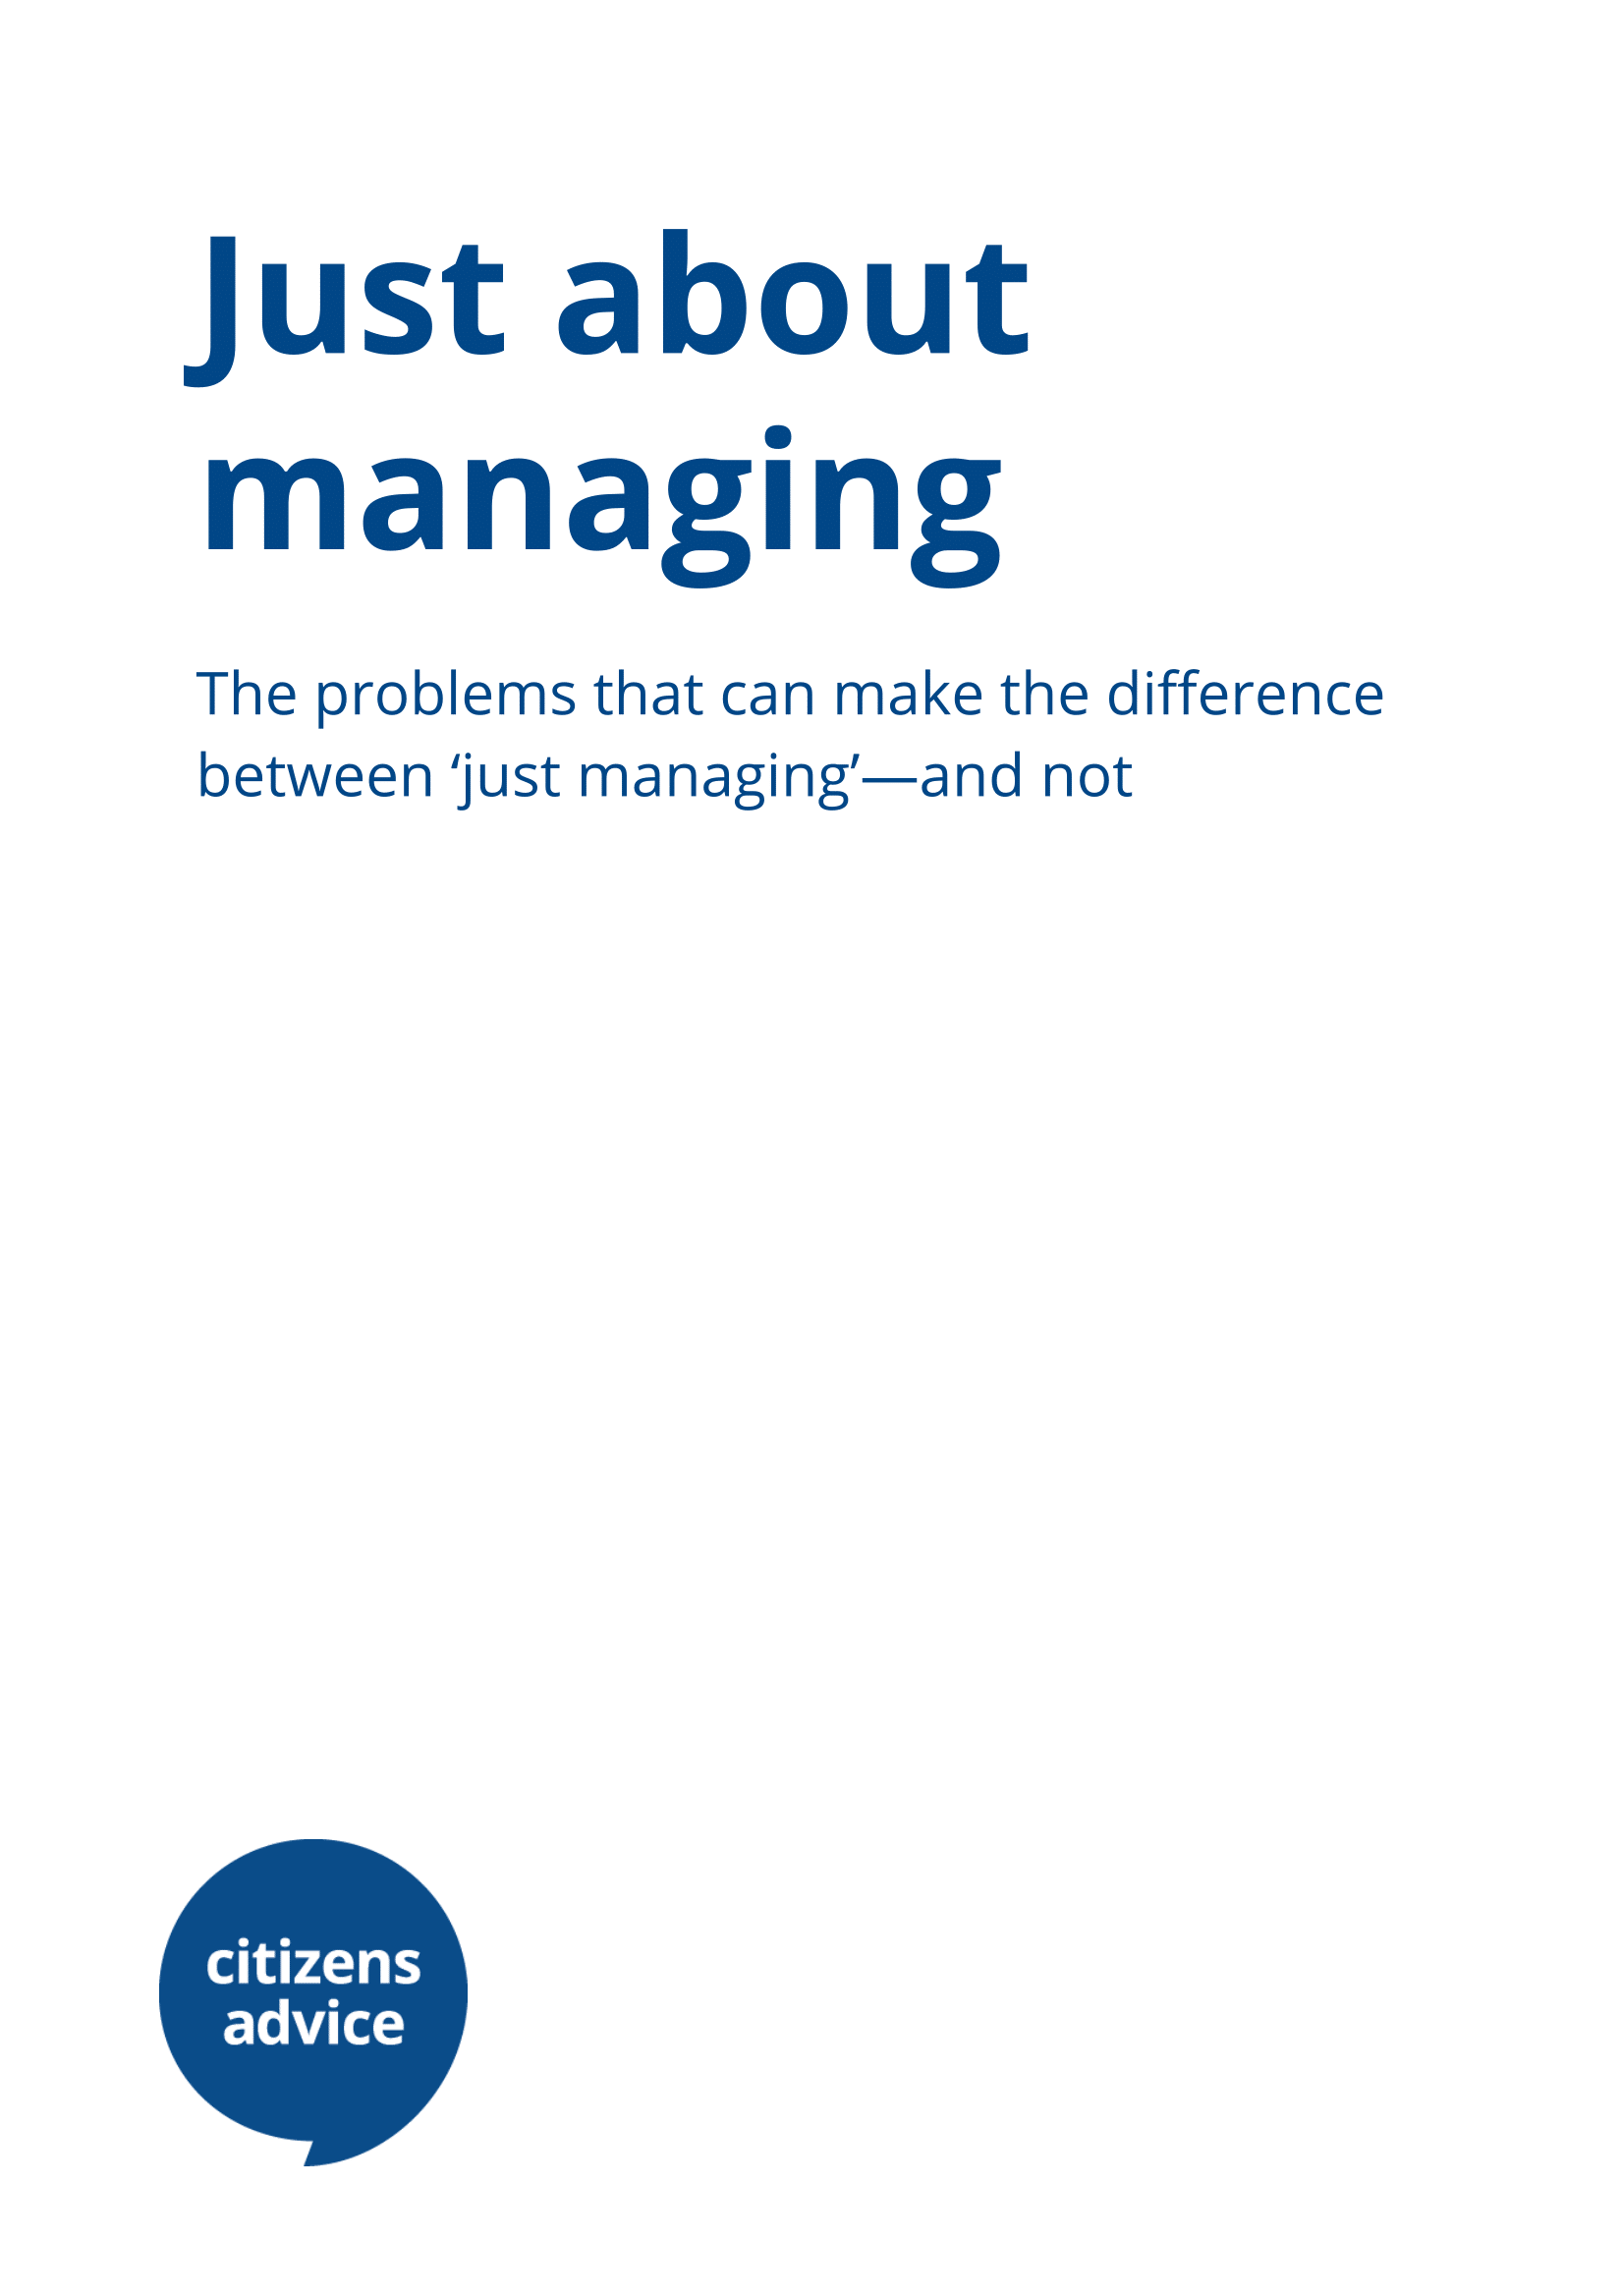 Image of Just about managing report cover 